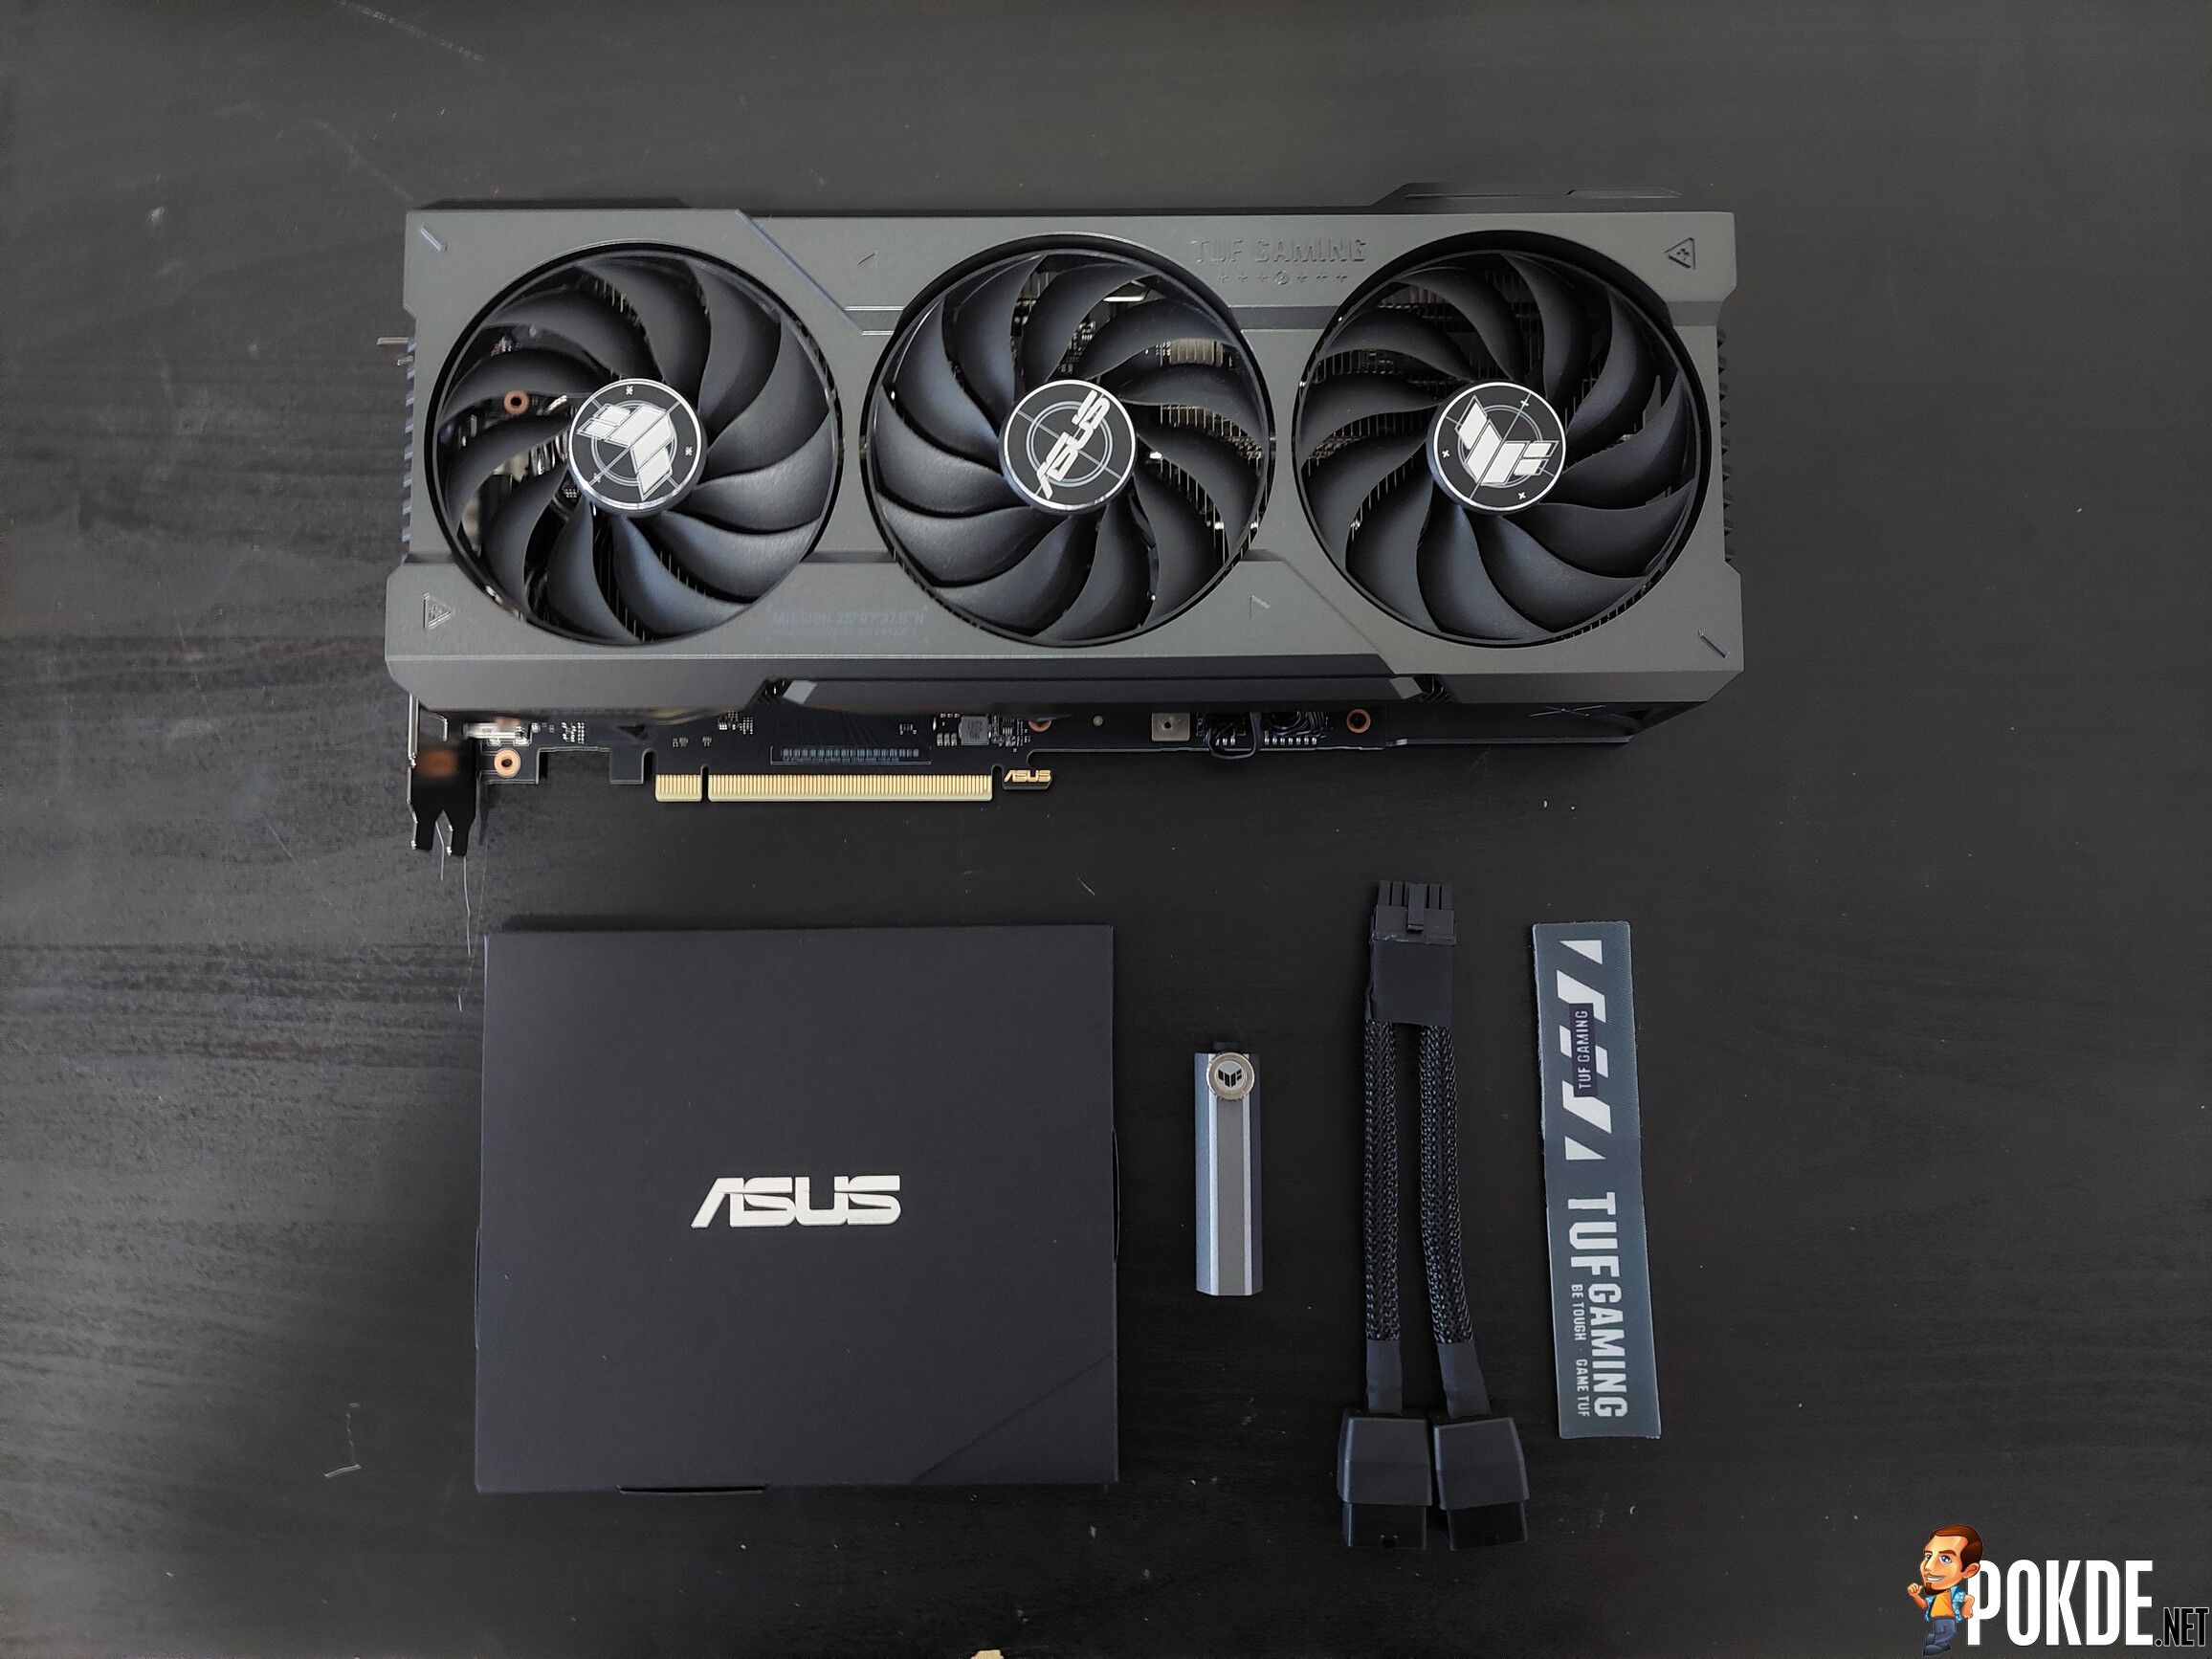 ASUS TUF Gaming GeForce RTX 4070 Ti OC Edition Review - Value Is Relative... 25